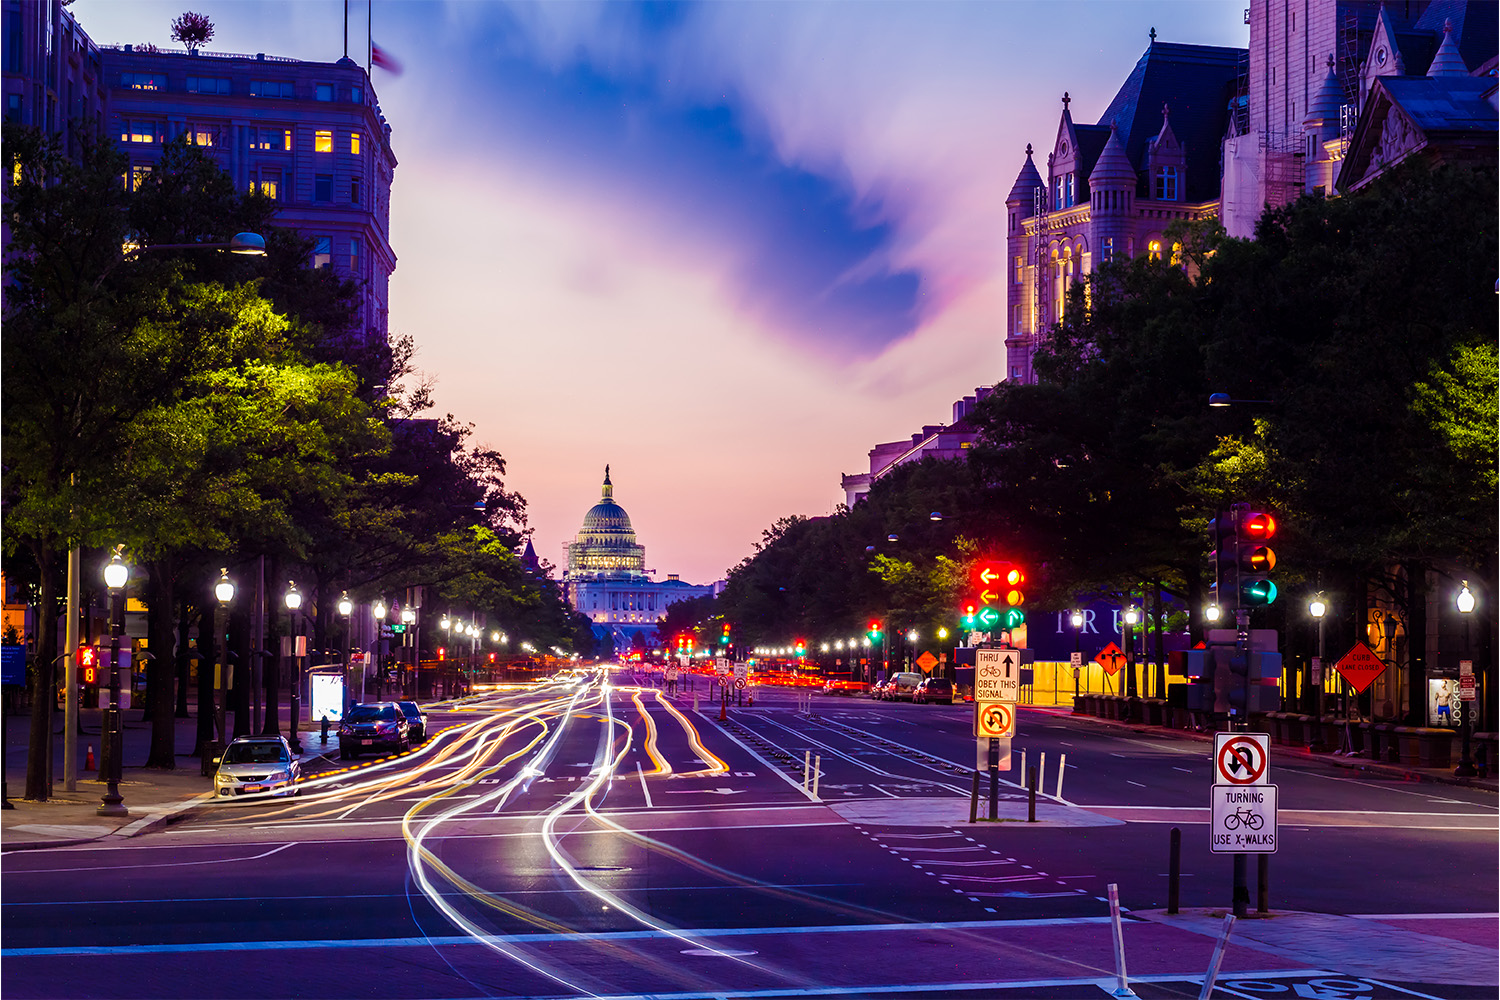 Light trails on the road in Washington, D.C. We asked bartenders, photographers and nightlife experts about the best late-night eats in D.C.